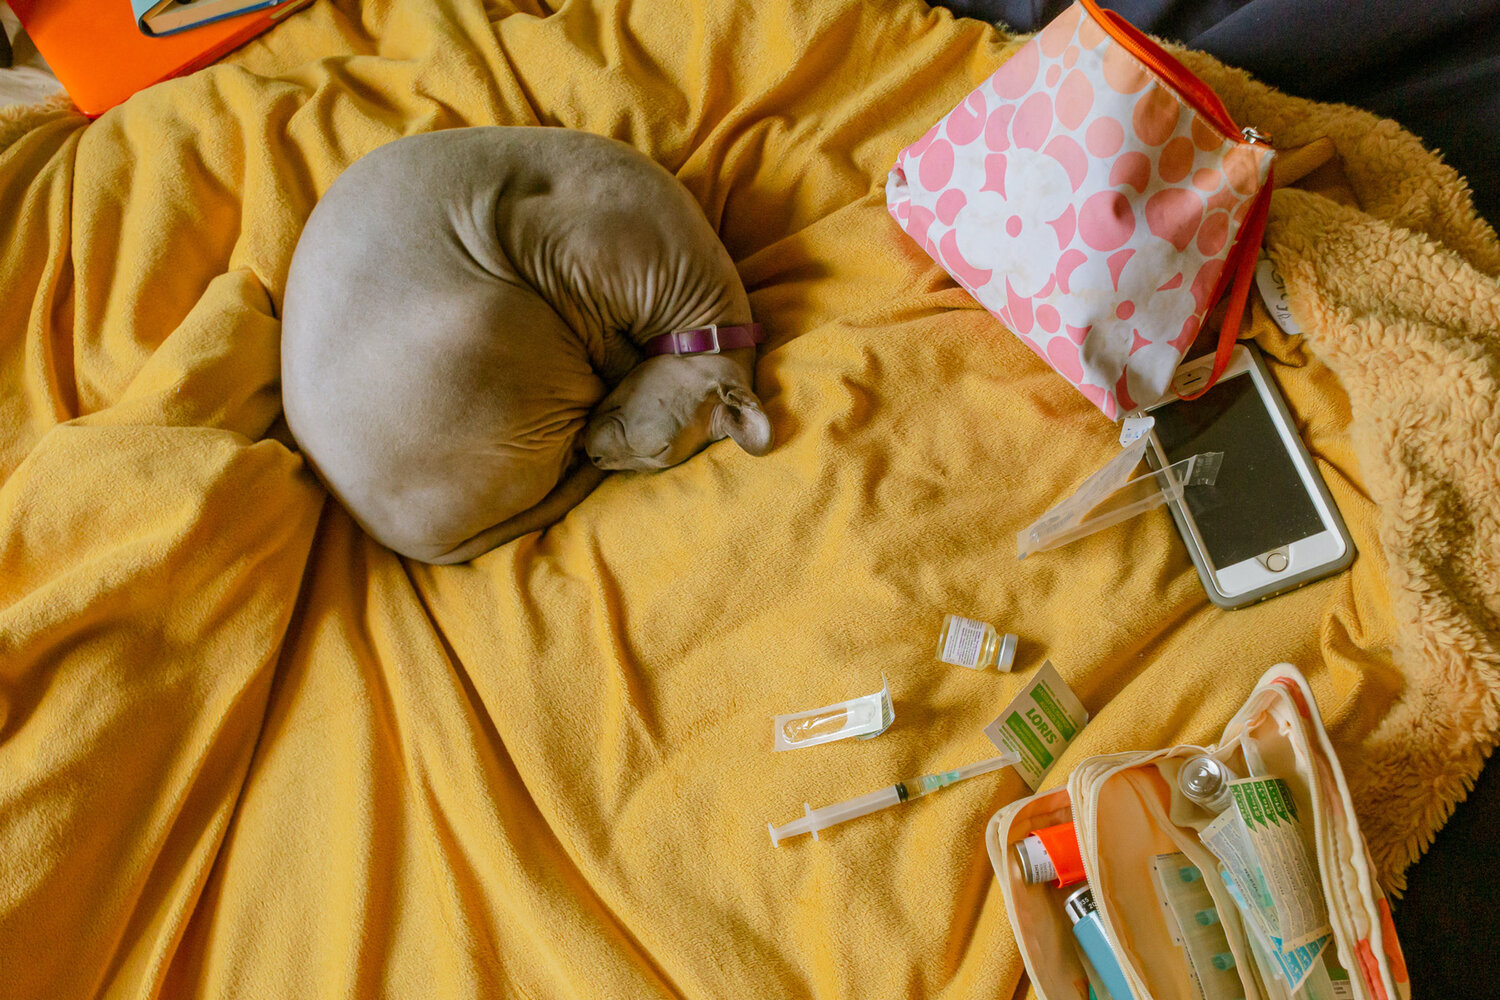 Colour photo of a grey hairless cat curled up asleep on a yellow blanket, beside it to the right are two fabric bags with zips, one is open showing medical contents including inhalers and a glass vial. Also on the blanket are a syringe, a phone, a glass vial and some empty wrappers.